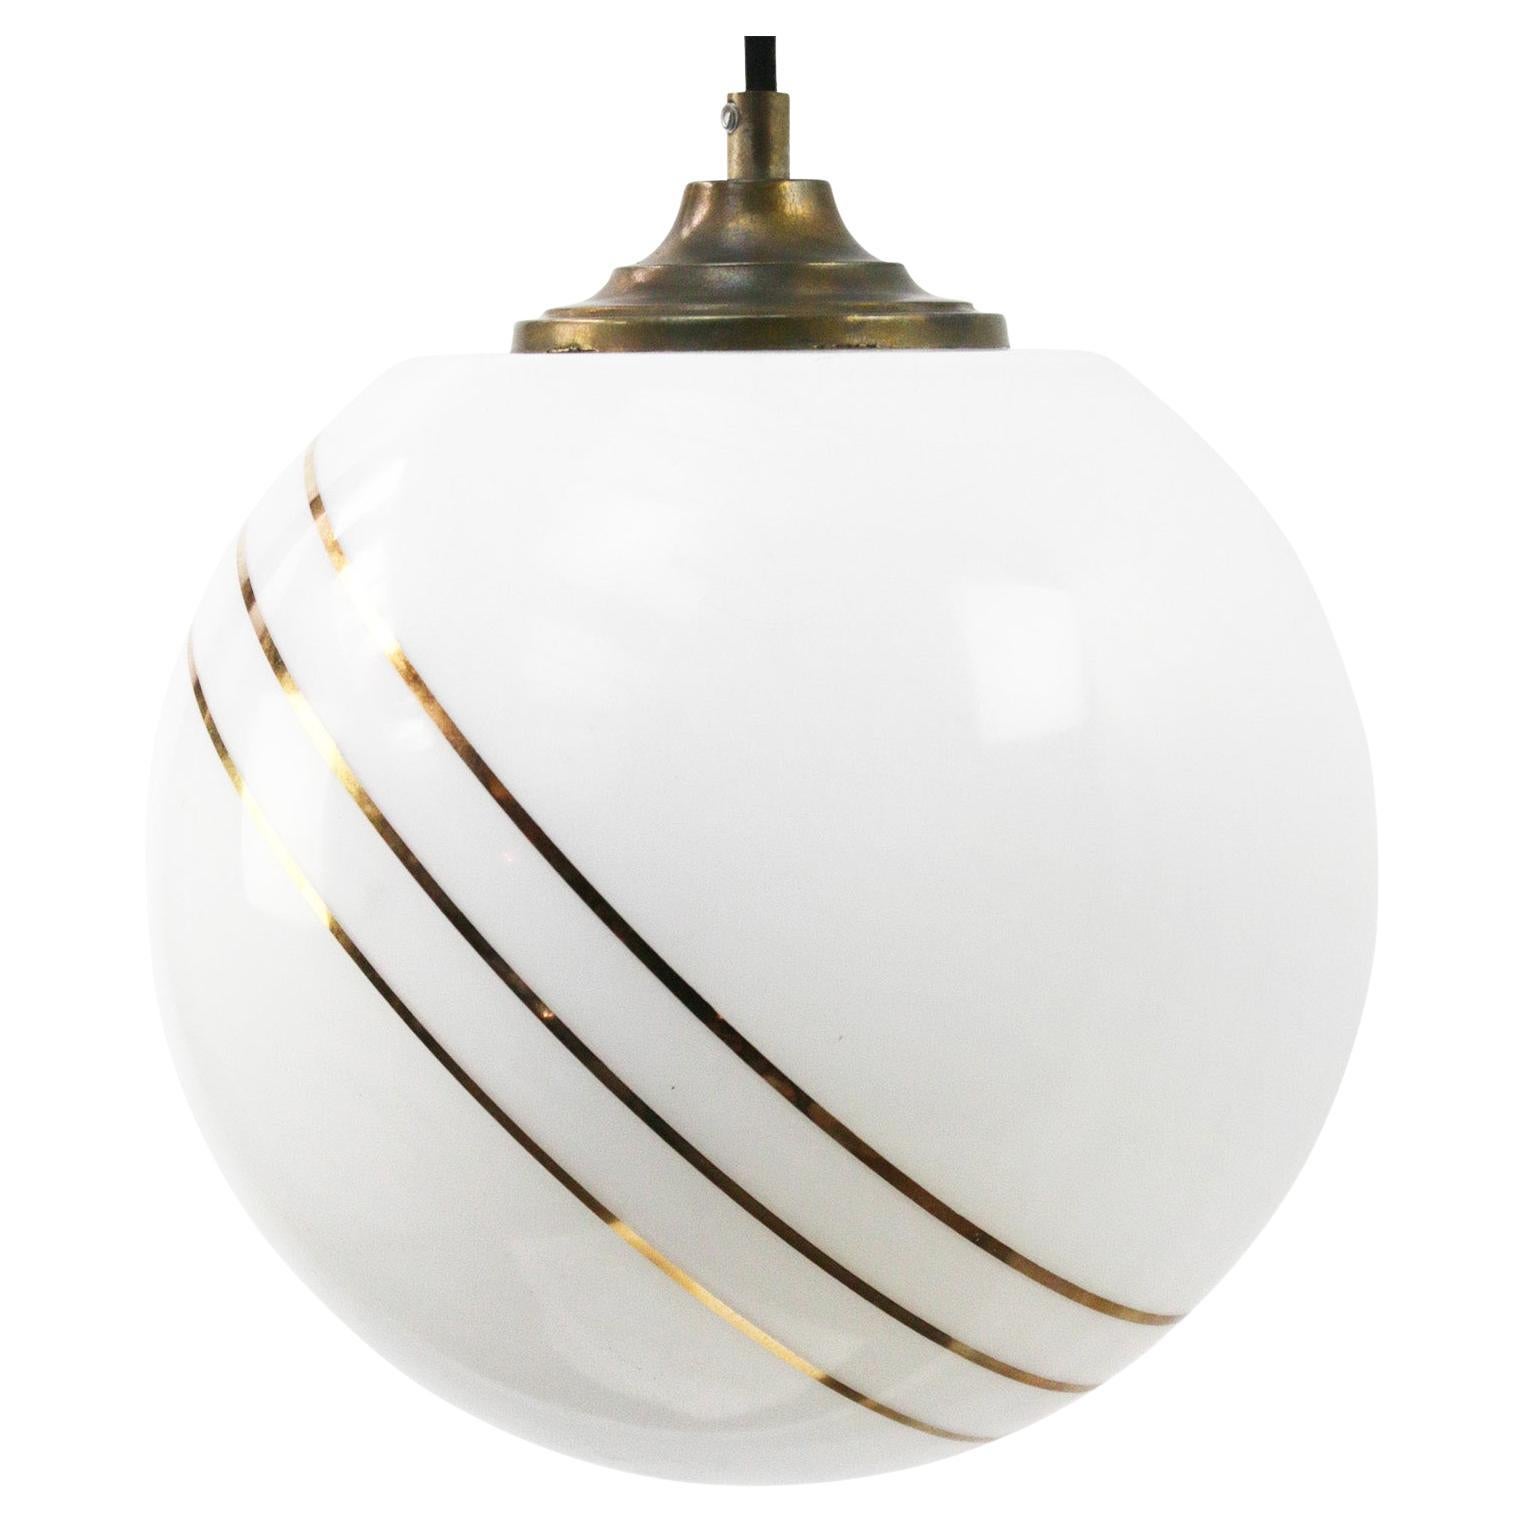 Opaline glass 25 Trois D’or pendant
2 meter black cotton flex
brass top

Weight: 2.00 kg / 4.4 lb

Priced per individual item. All lamps have been made suitable by international standards for incandescent light bulbs, energy-efficient and LED